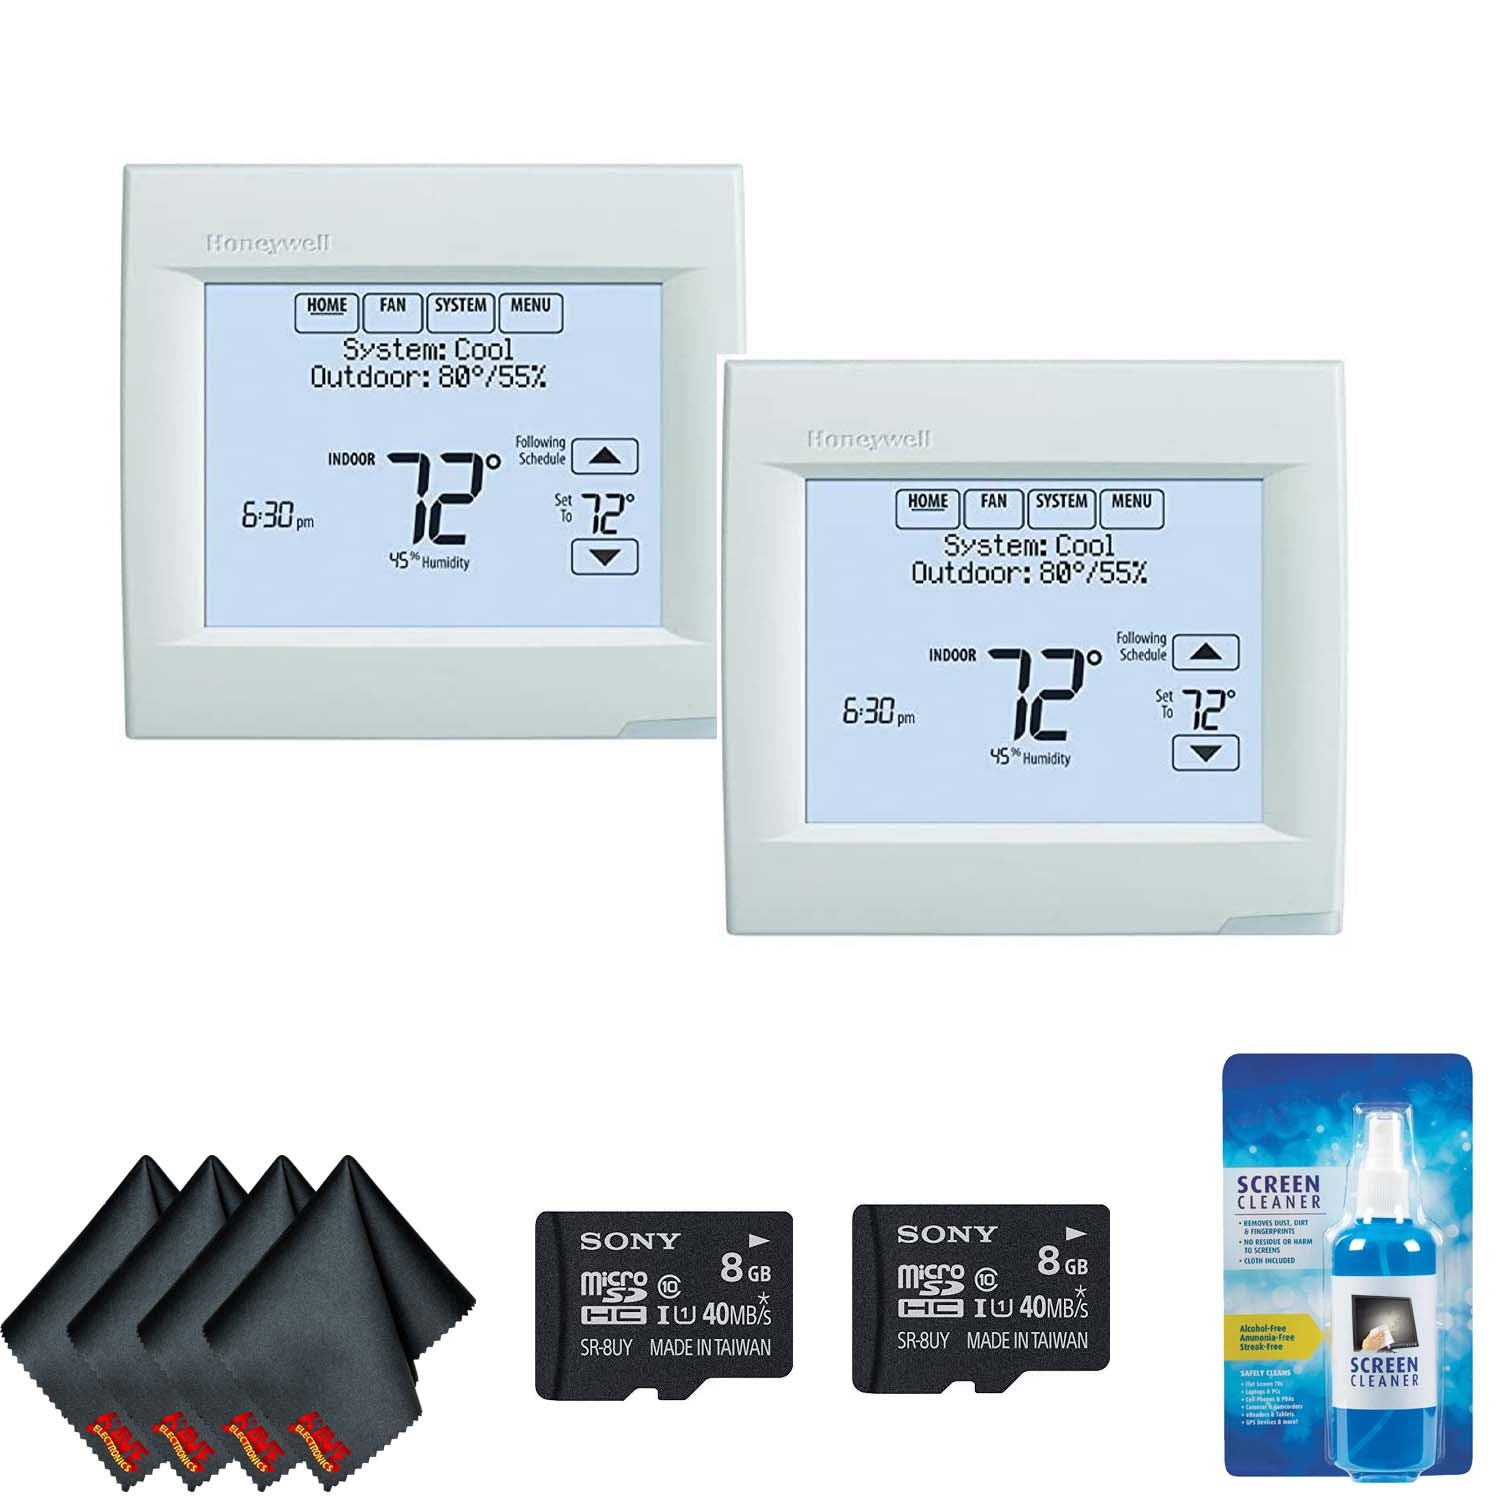 Honeywell TH8321R1001 Vision pro 8000 Thermostat (White) (2-Pack) Bundle